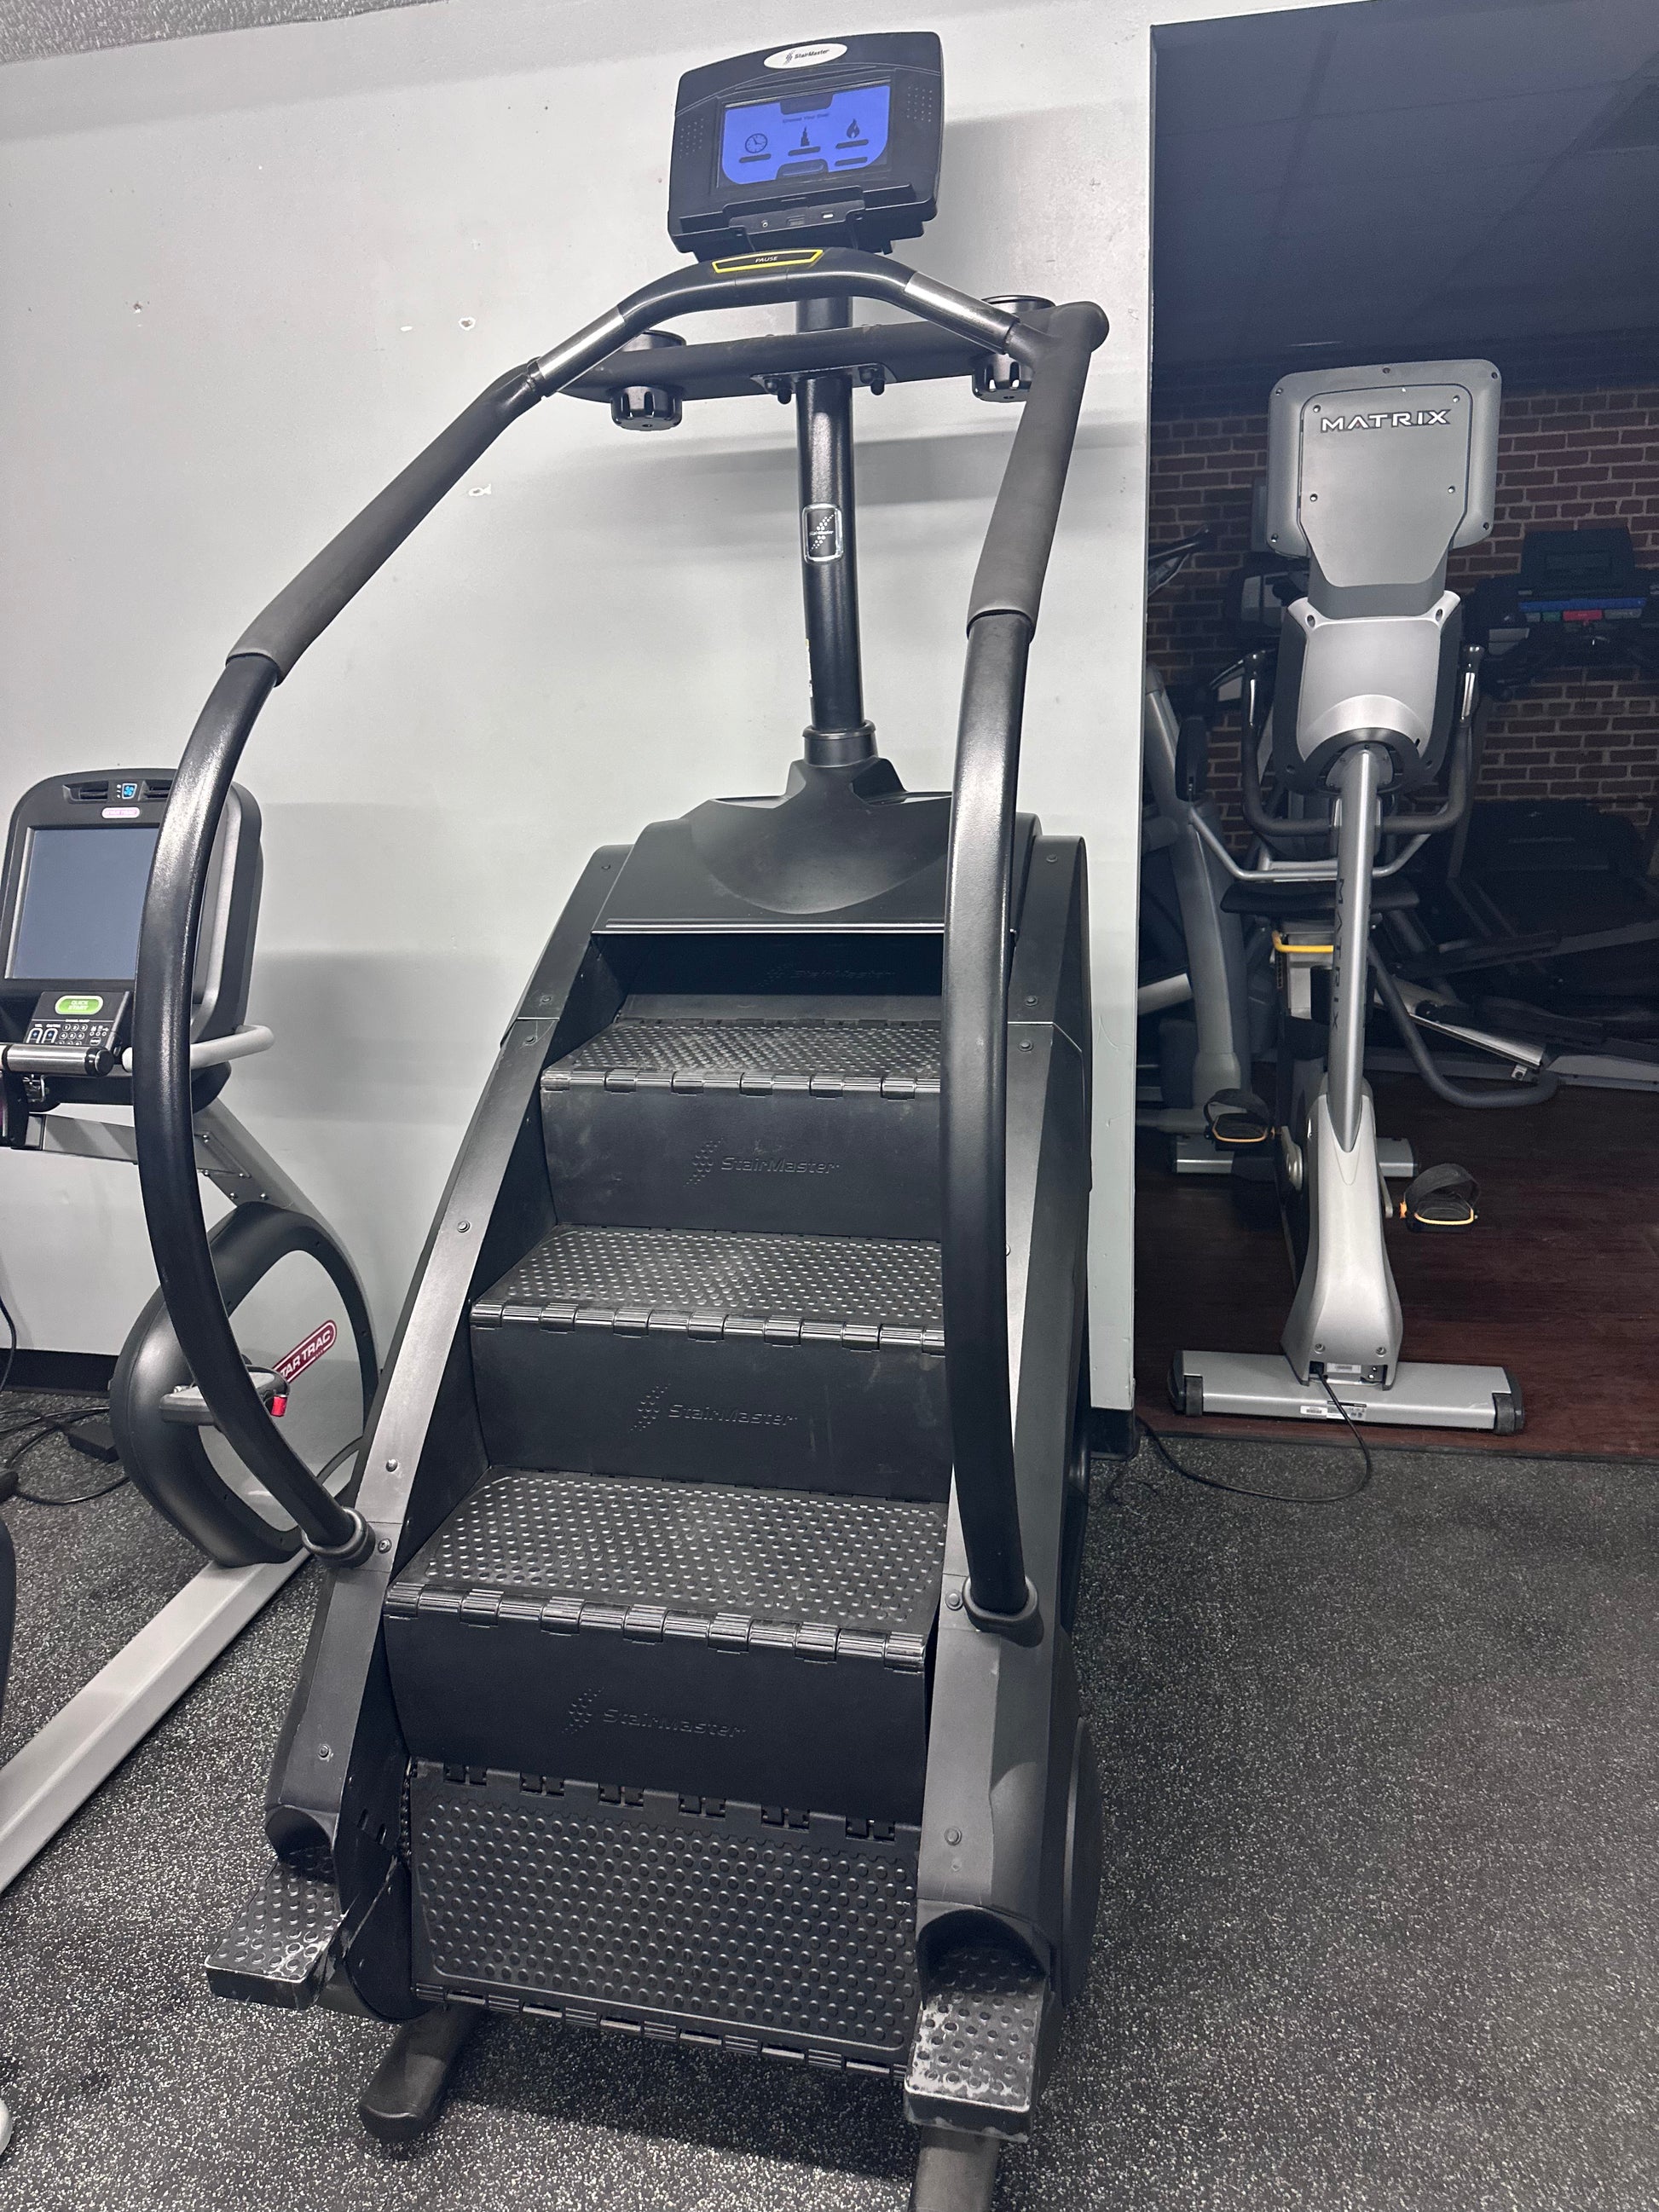 Refurbished StairMaster Gauntlet 8 Series Stepmill with Touchscreen - ExerciseUnlimited